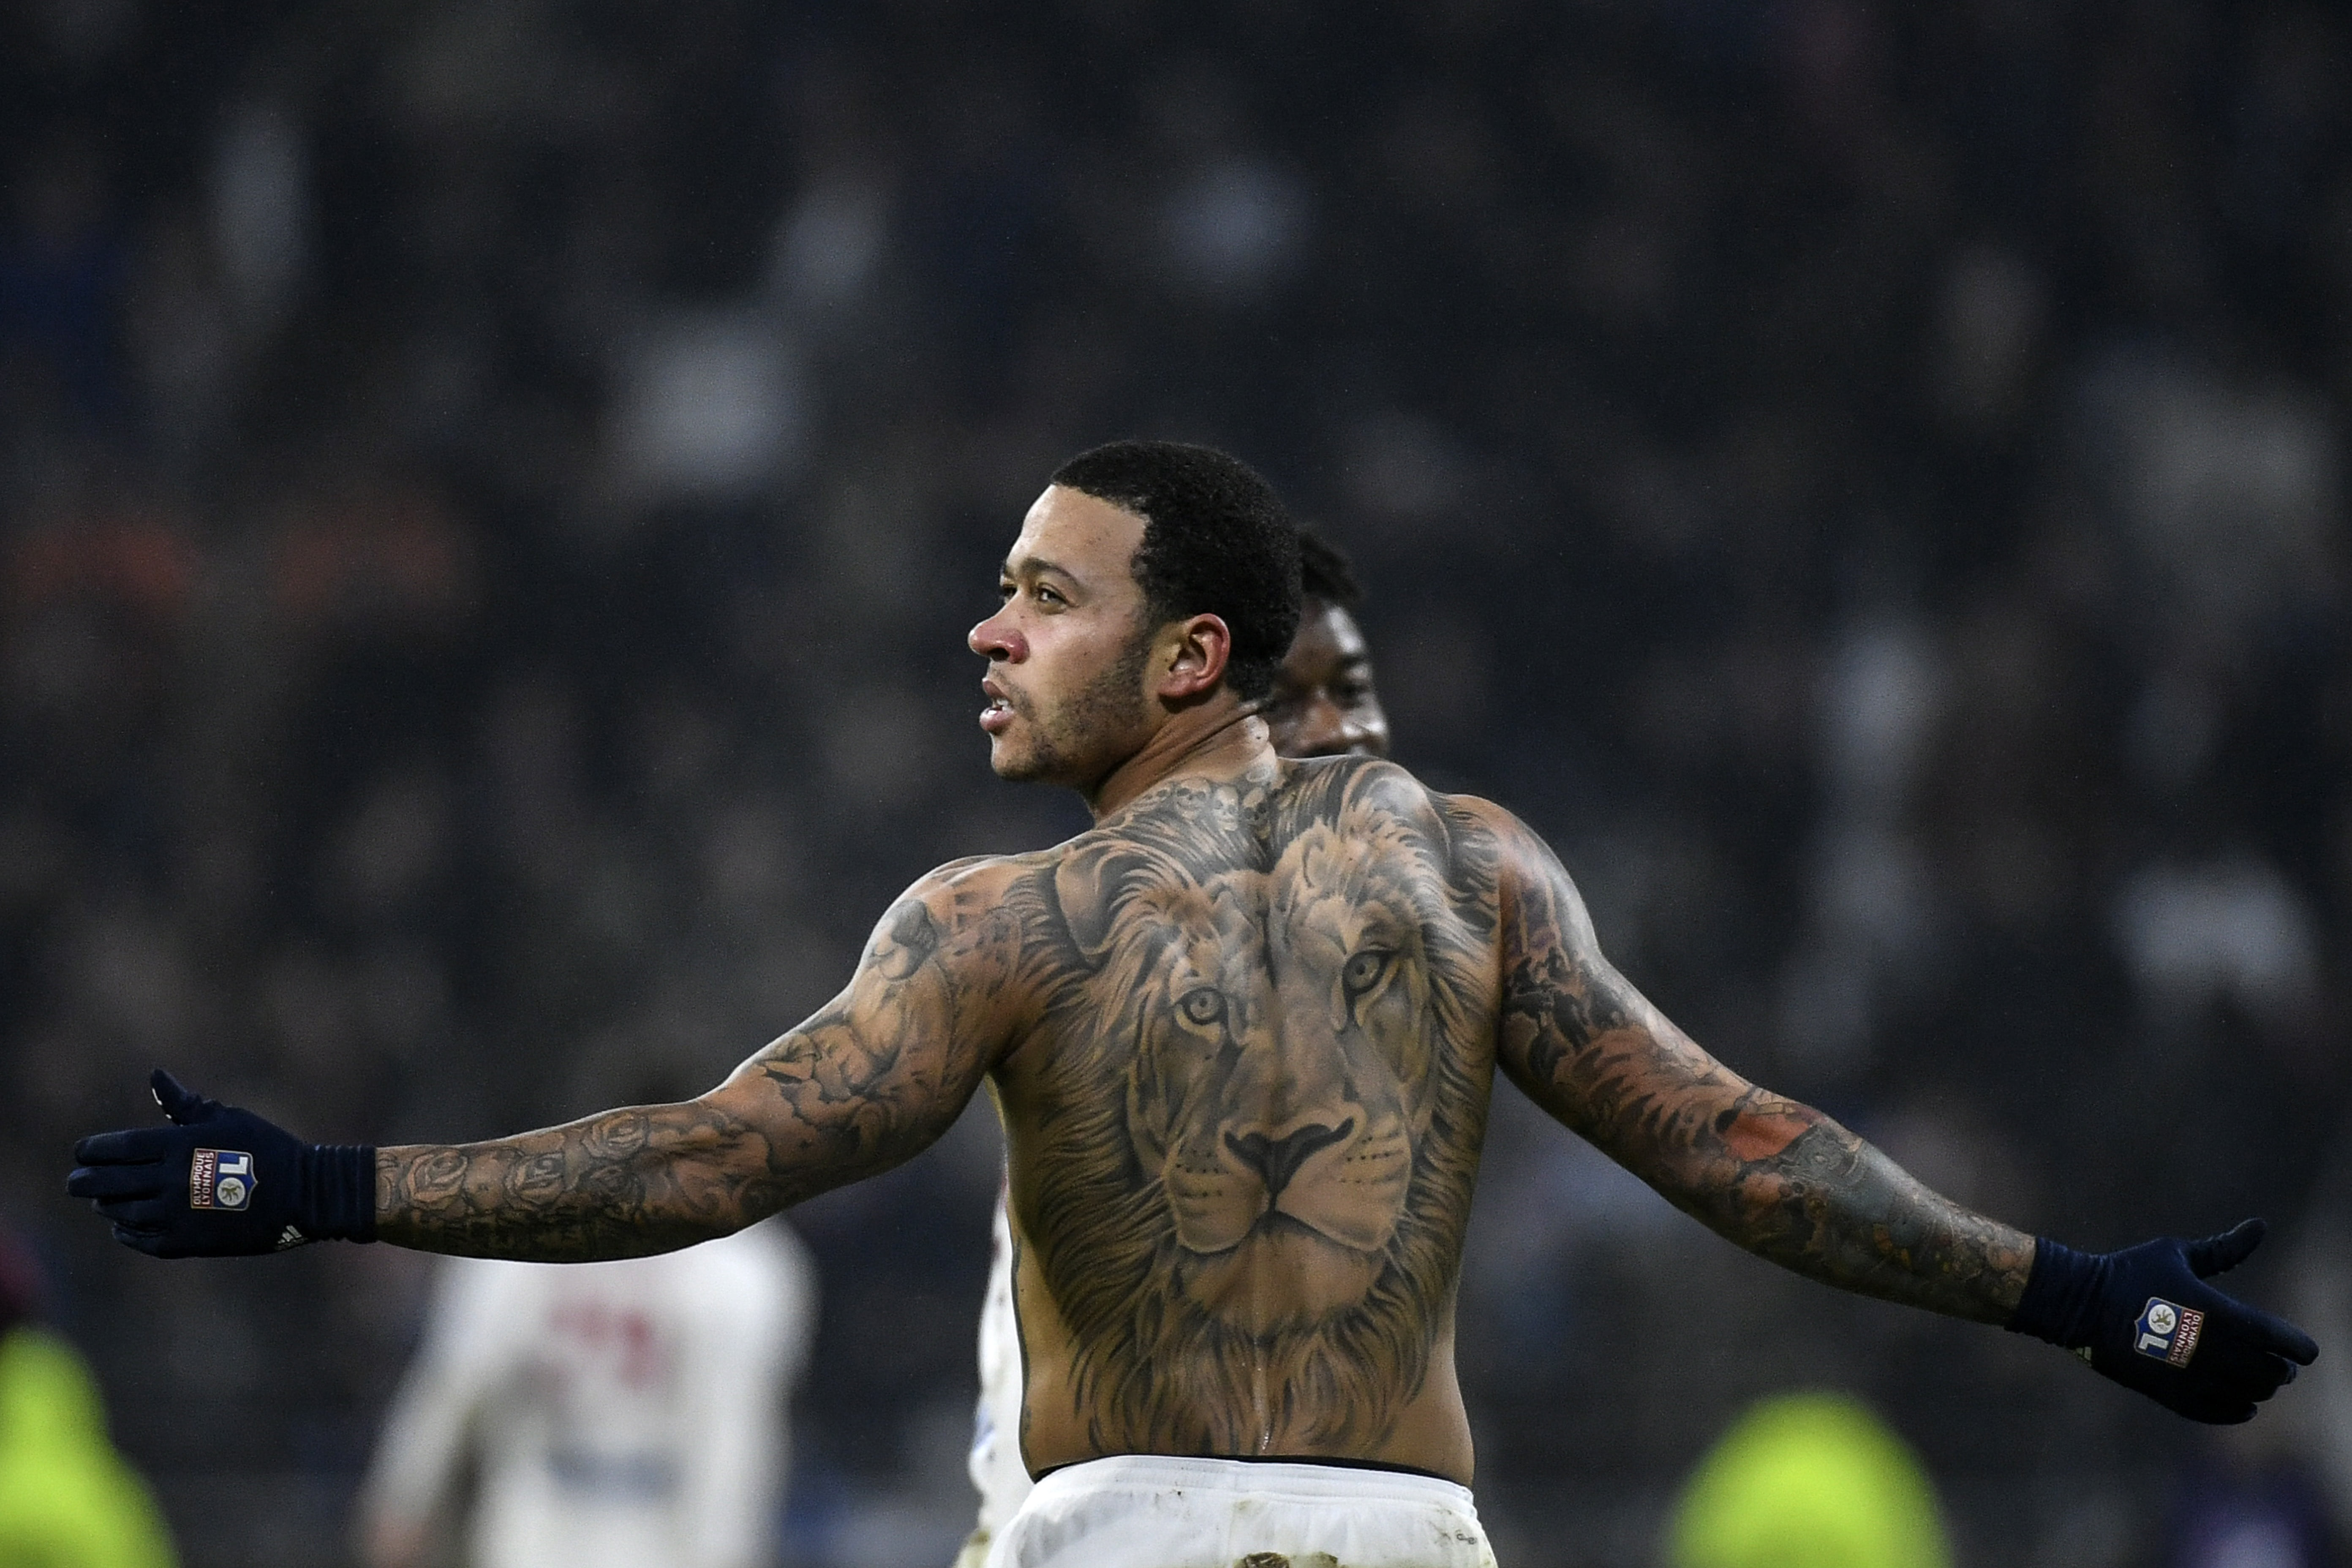 Tattoos are seen on the legs of Memphis Depay of Olympique